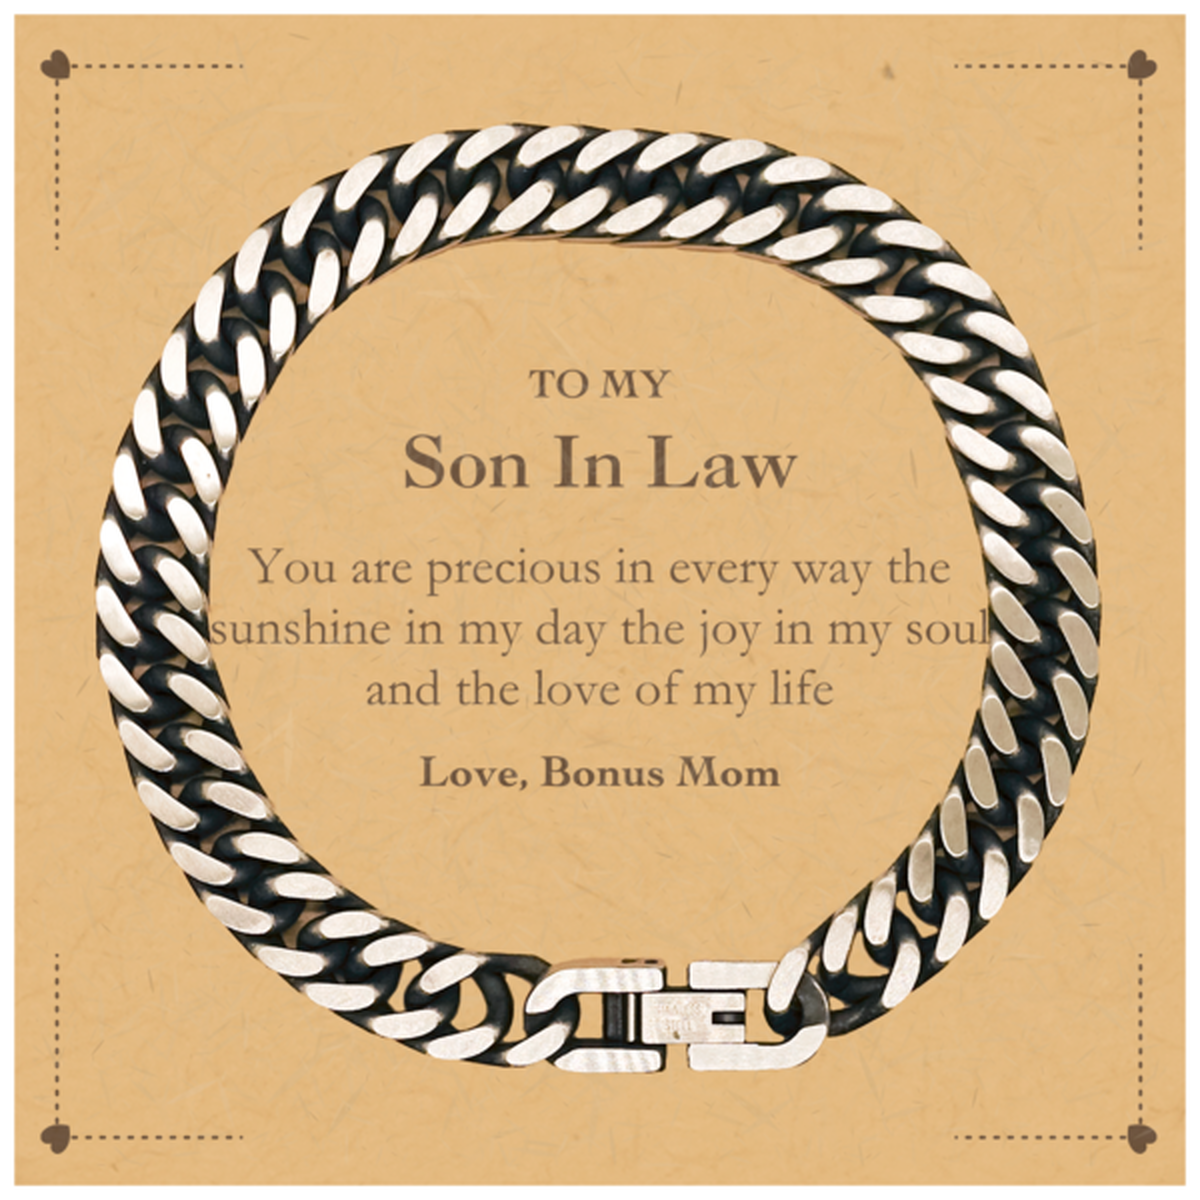 Graduation Gifts for Son In Law Cuban Link Chain Bracelet Present from Bonus Mom, Christmas Son In Law Birthday Gifts Son In Law You are precious in every way the sunshine in my day. Love, Bonus Mom